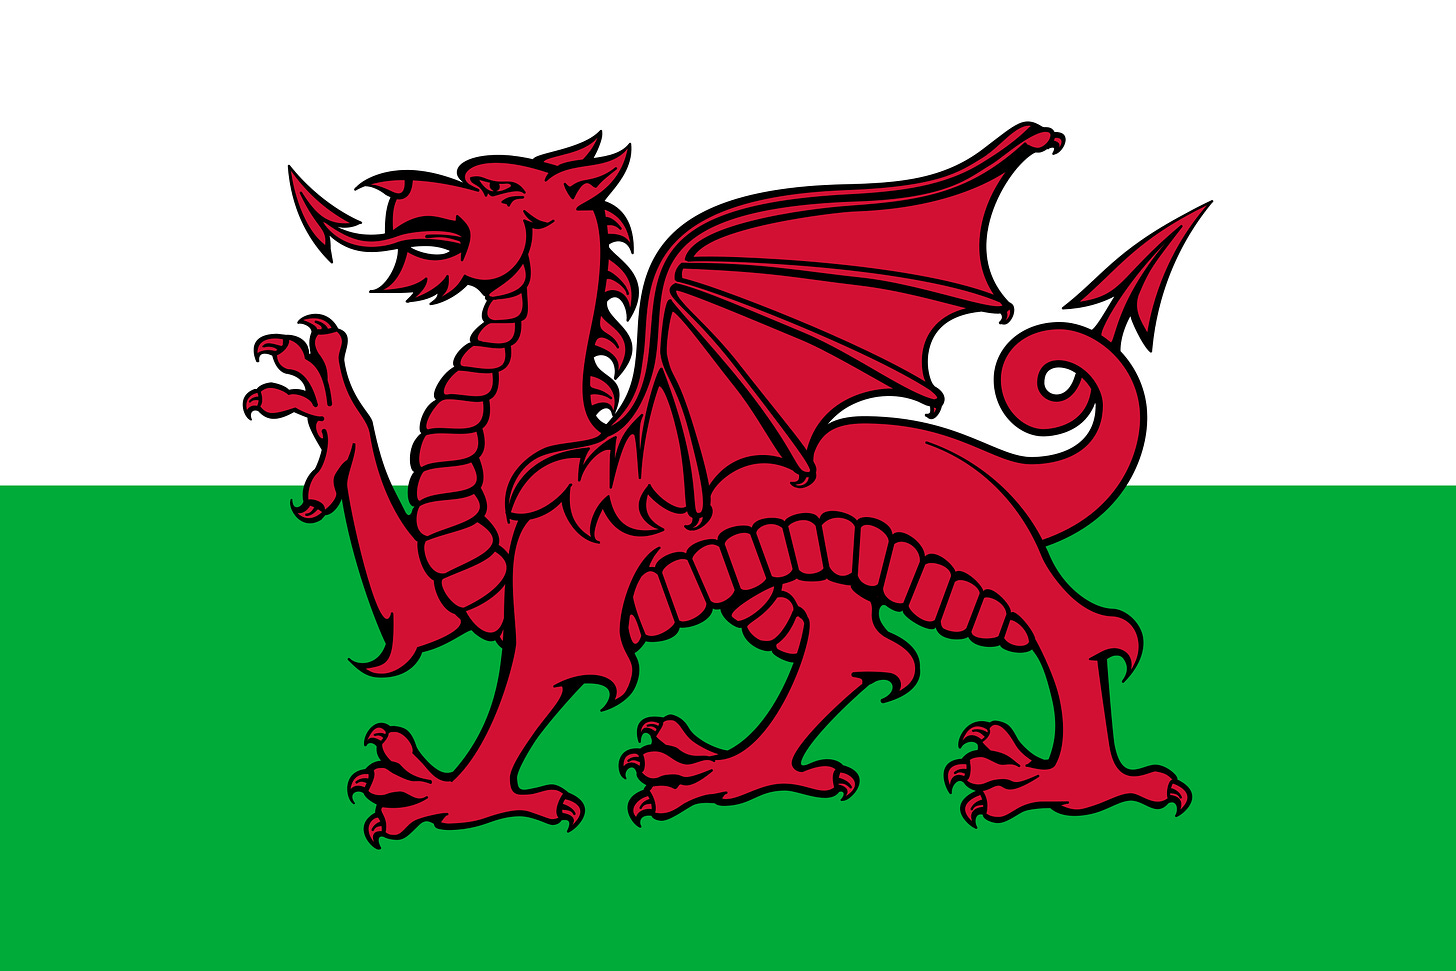 File:Flag of Wales (1959).svg - Wikimedia Commons